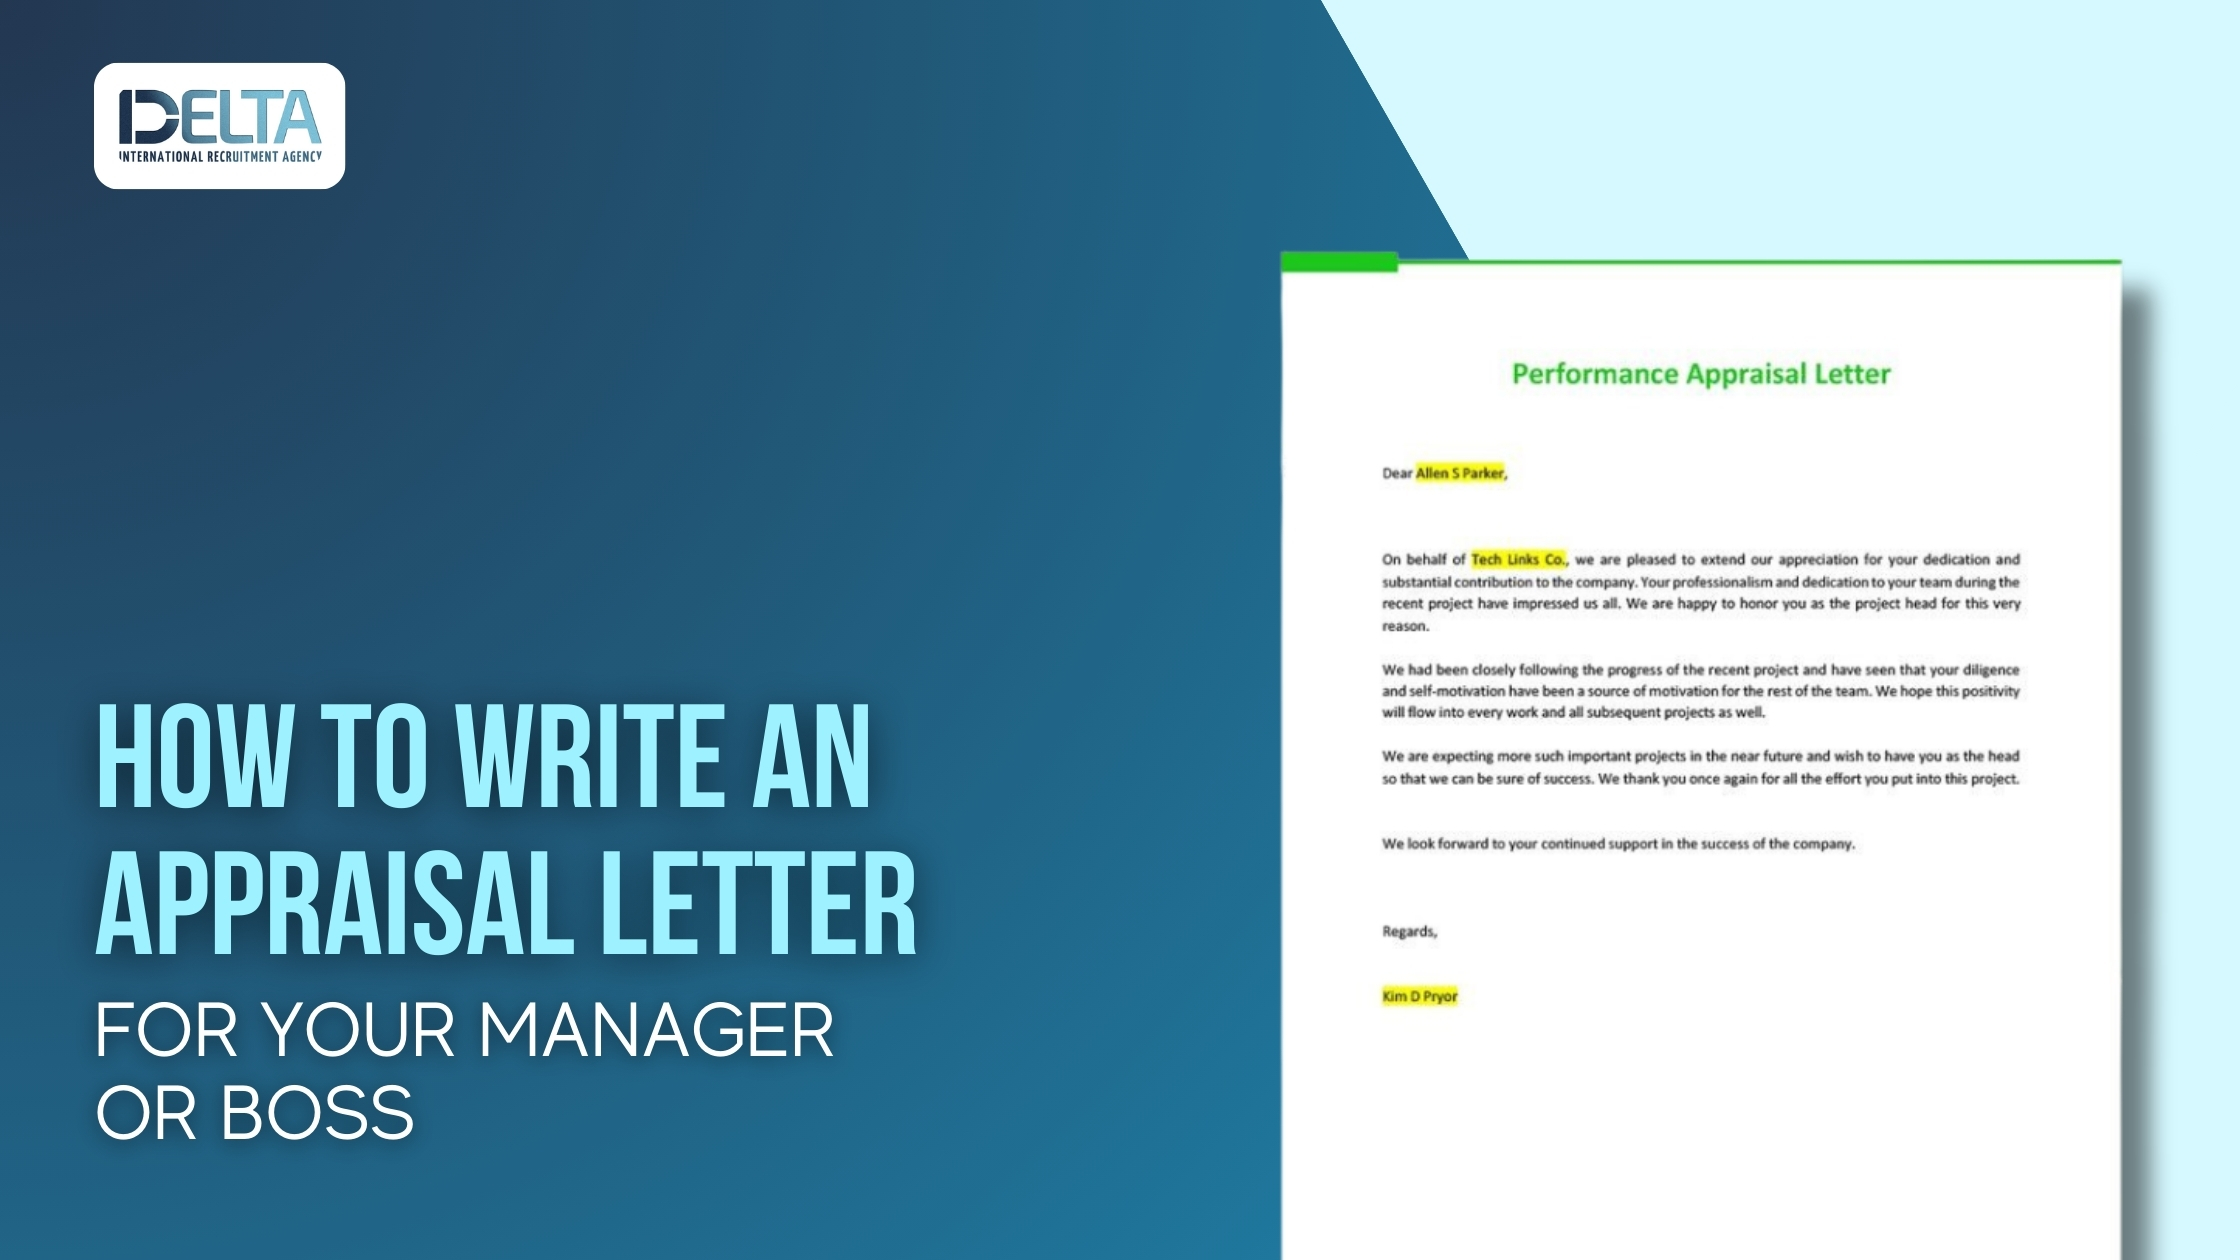 How to Write an Appraisal Letter for Your Manager or Boss